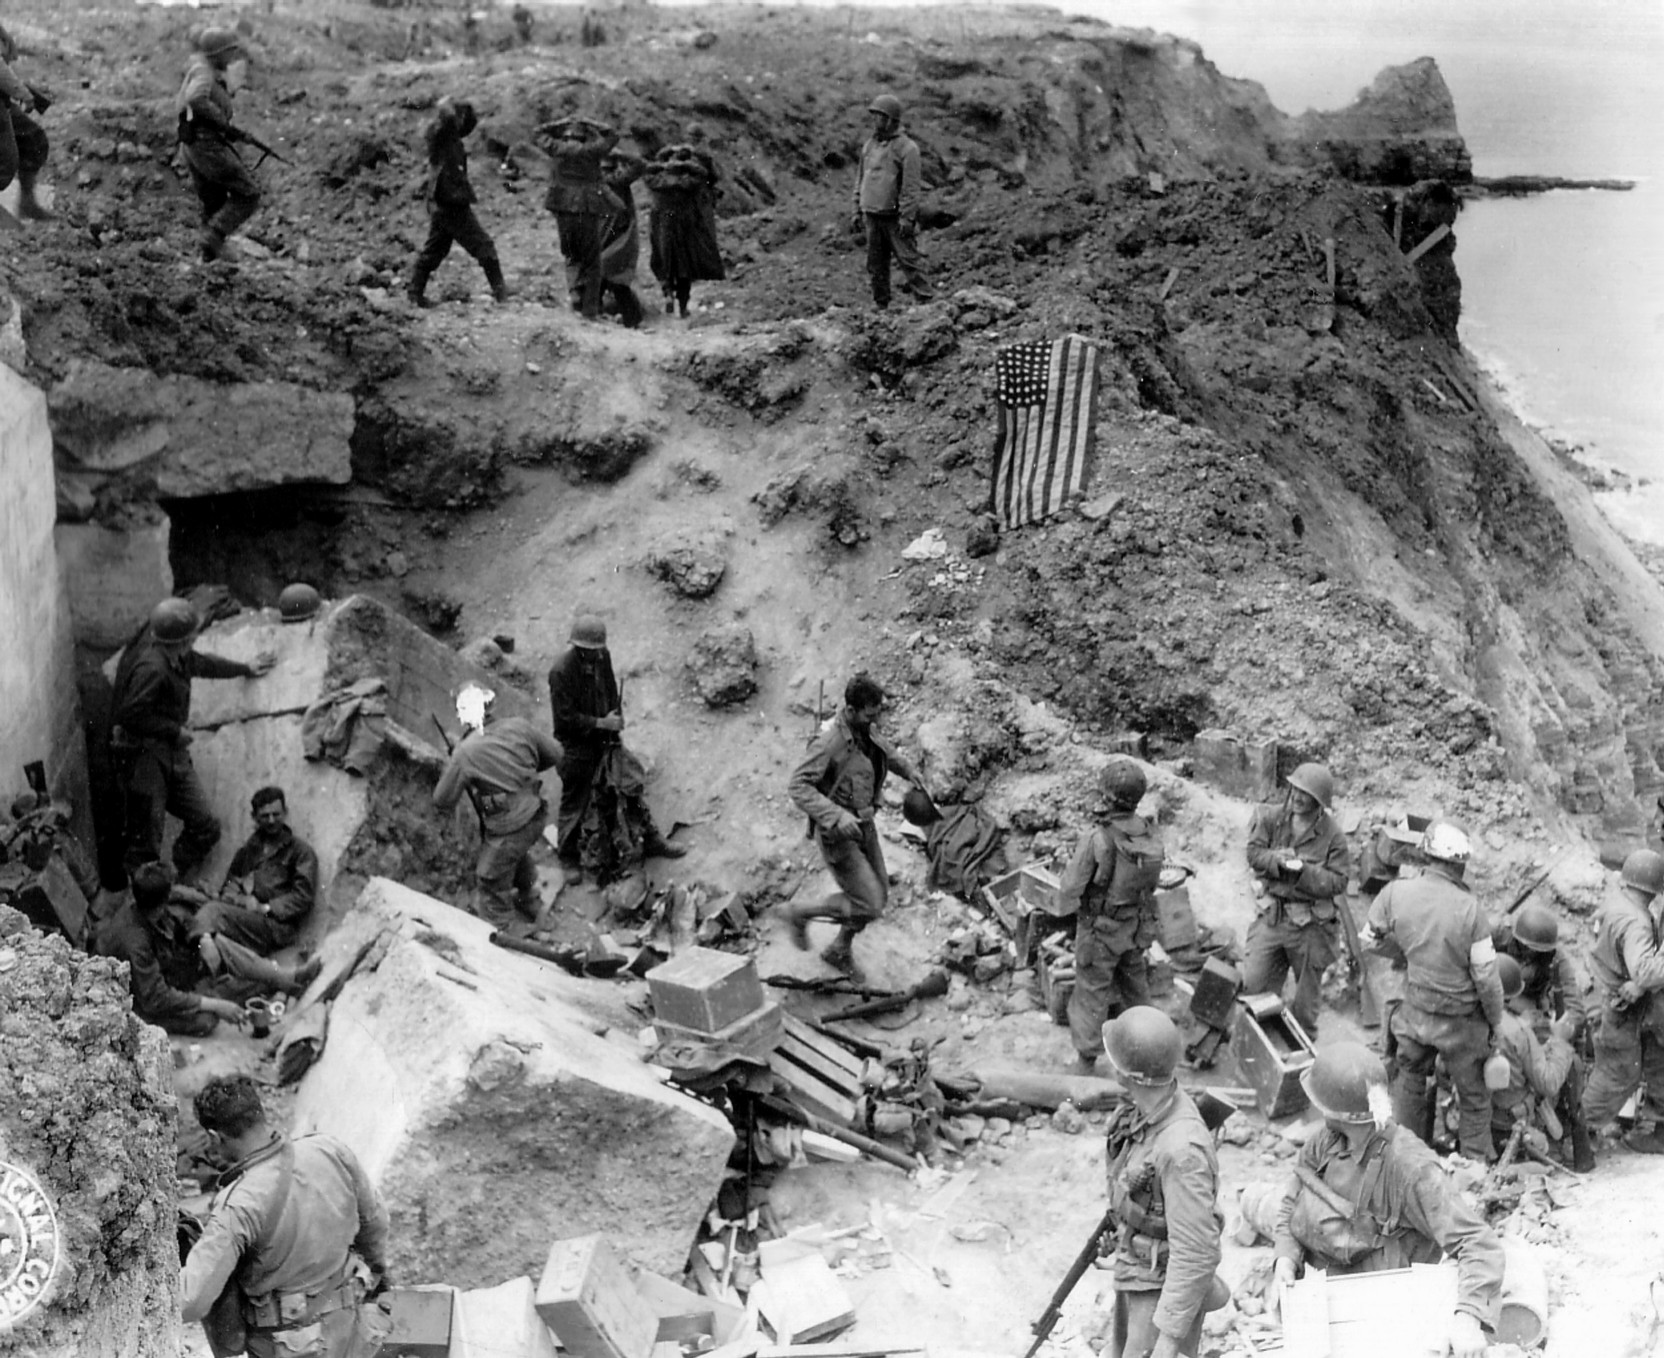 German prisoners being taken away atop a cliff at Pointe du Hoc, Normandy, France, 8 Jun 1944; note American flag draped on cliff wall to prevent friendly fire